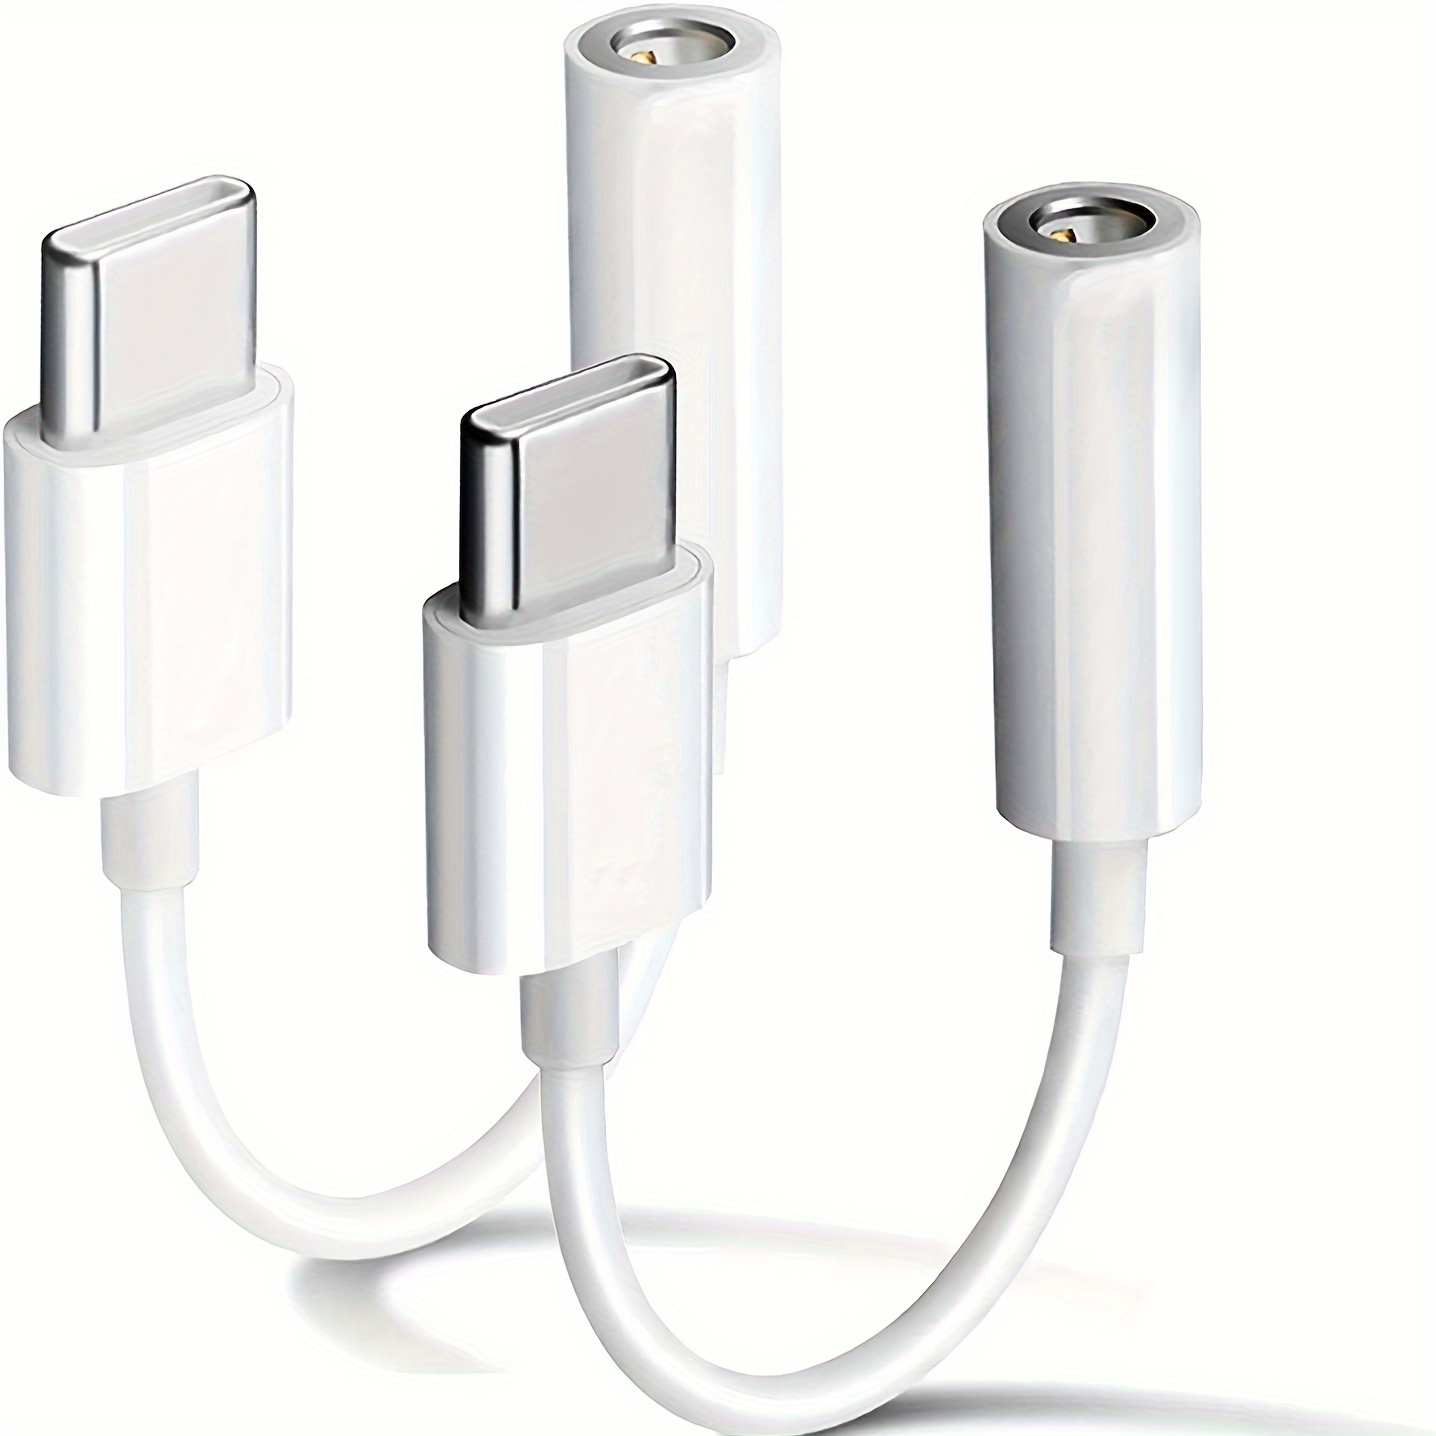 For Iphone Headphones Adapter, For Iphone To Earphone Jack